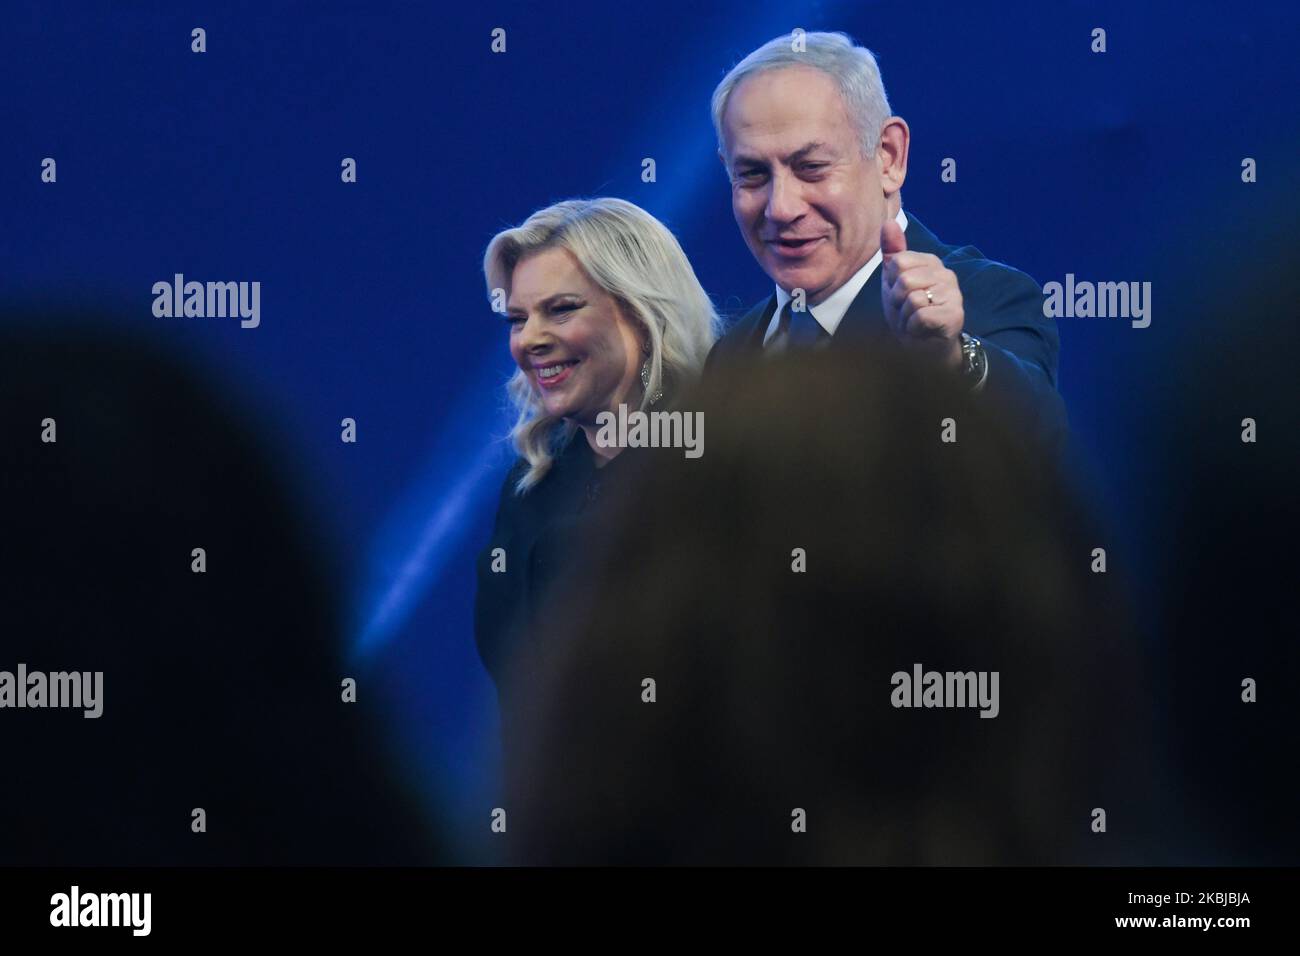 Israeli Prime Minister Benjamin Netanyahu walks and gestures next to his wife Sara on his way to speak to supporters following the announcement of exit polls in Israel's election at his Likud party headquarters in Tel Aviv. On Tuesday, March 3, 2020, in Tel Aviv, Israel. (Photo by Artur Widak/NurPhoto) Stock Photo